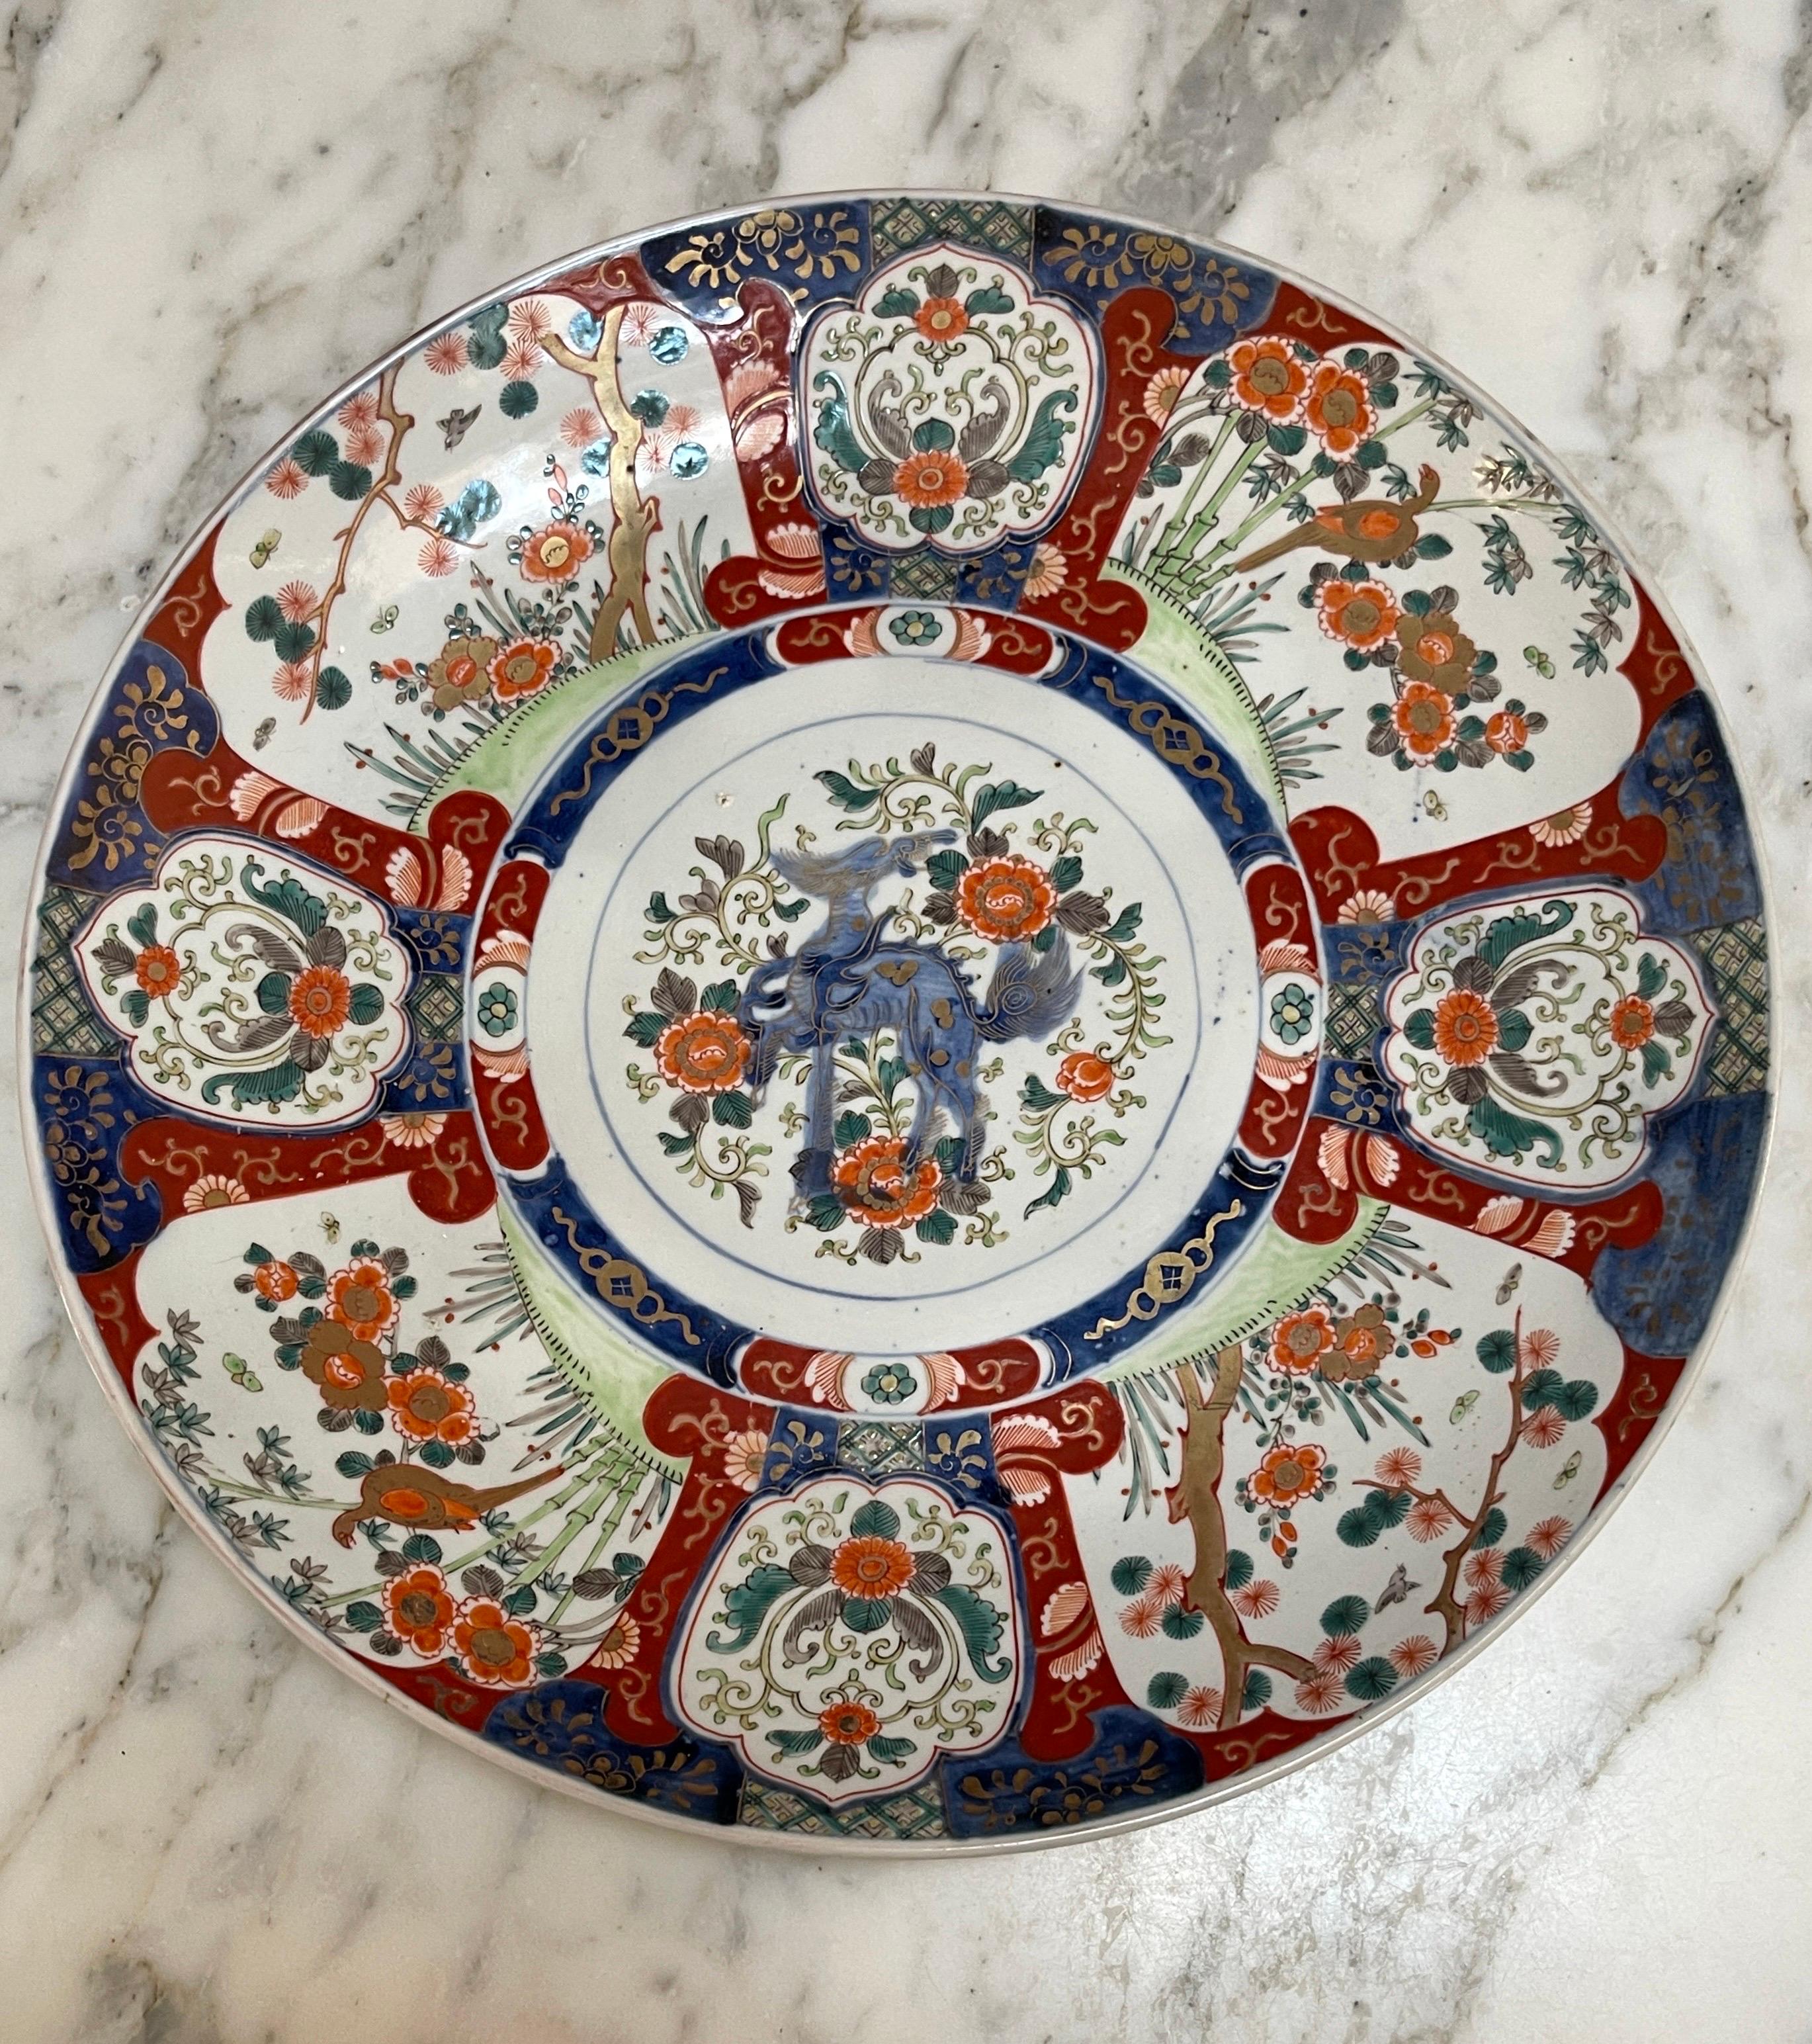 Massive Meiji Period Imari Foo Dog Charger, Attributed to Fukagawa
Japan, circa 1900
A magnificent Meiji Period Imari Charger, a true masterwork attributed to the renowned Fukagawa factory in Japan, dating back to circa 1900. This charger is a